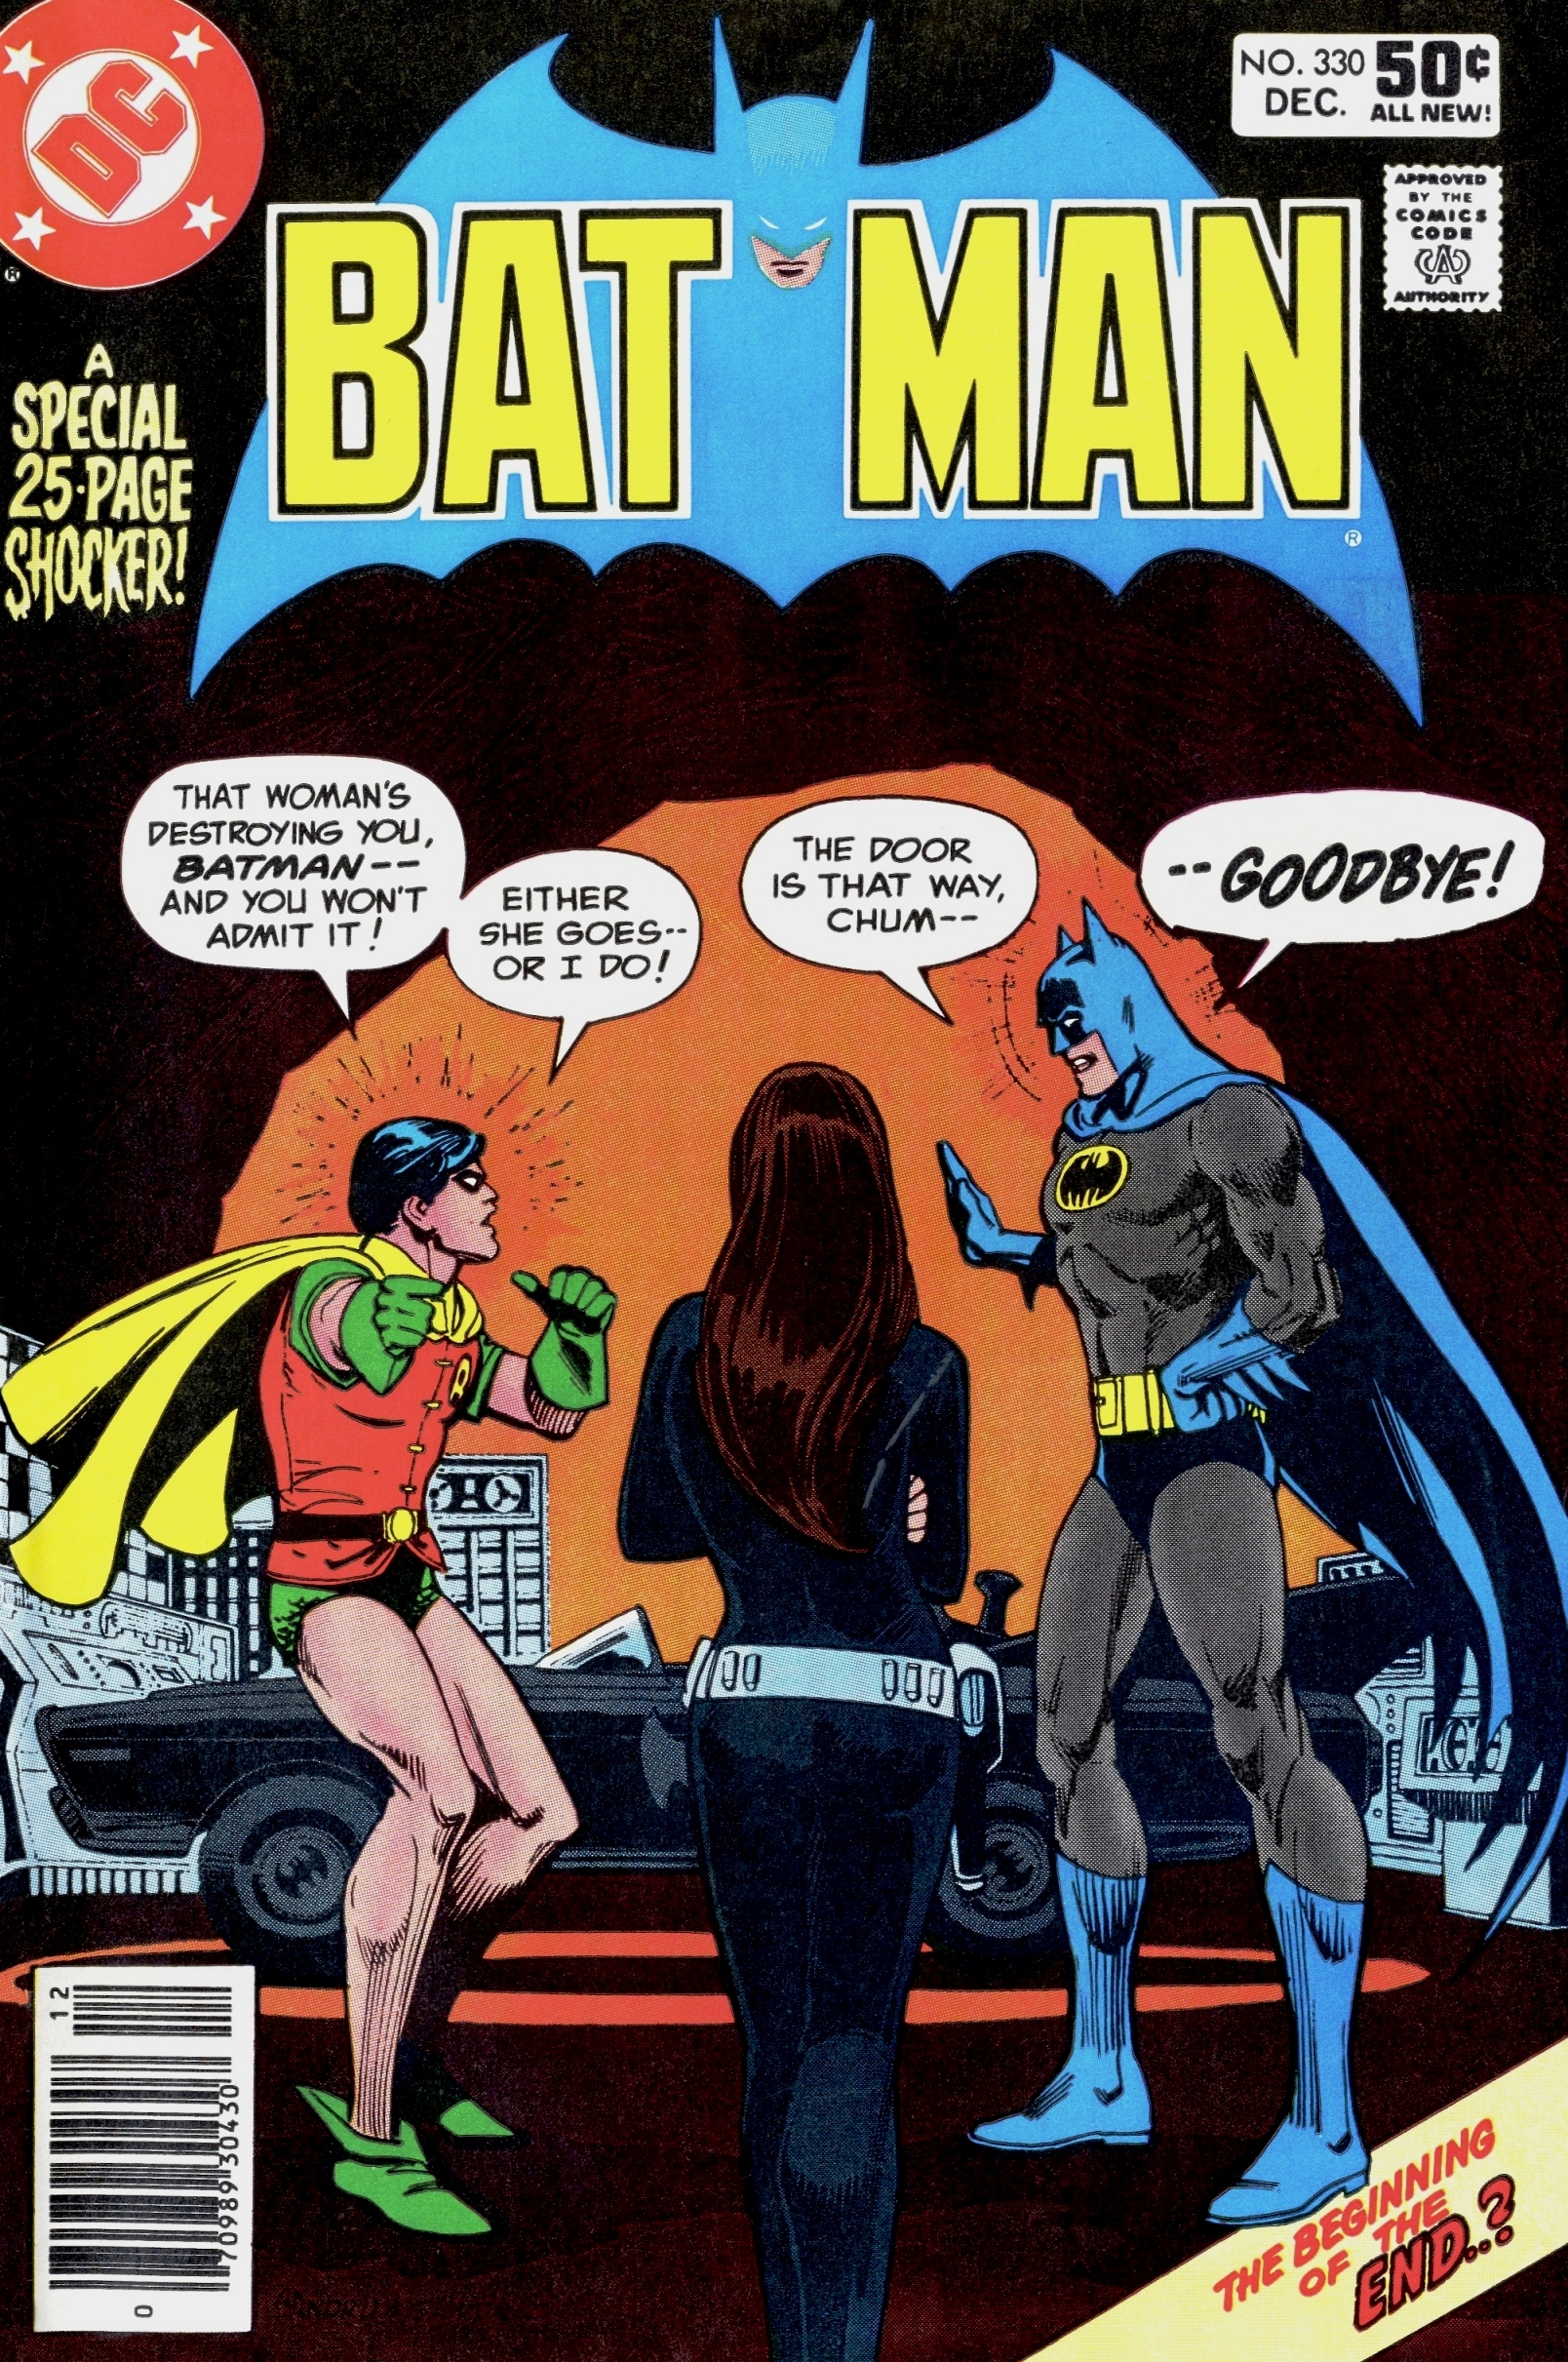 Batman 1940 Issue 330 | Read Batman 1940 Issue 330 comic online in high  quality. Read Full Comic online for free - Read comics online in high  quality .| READ COMIC ONLINE